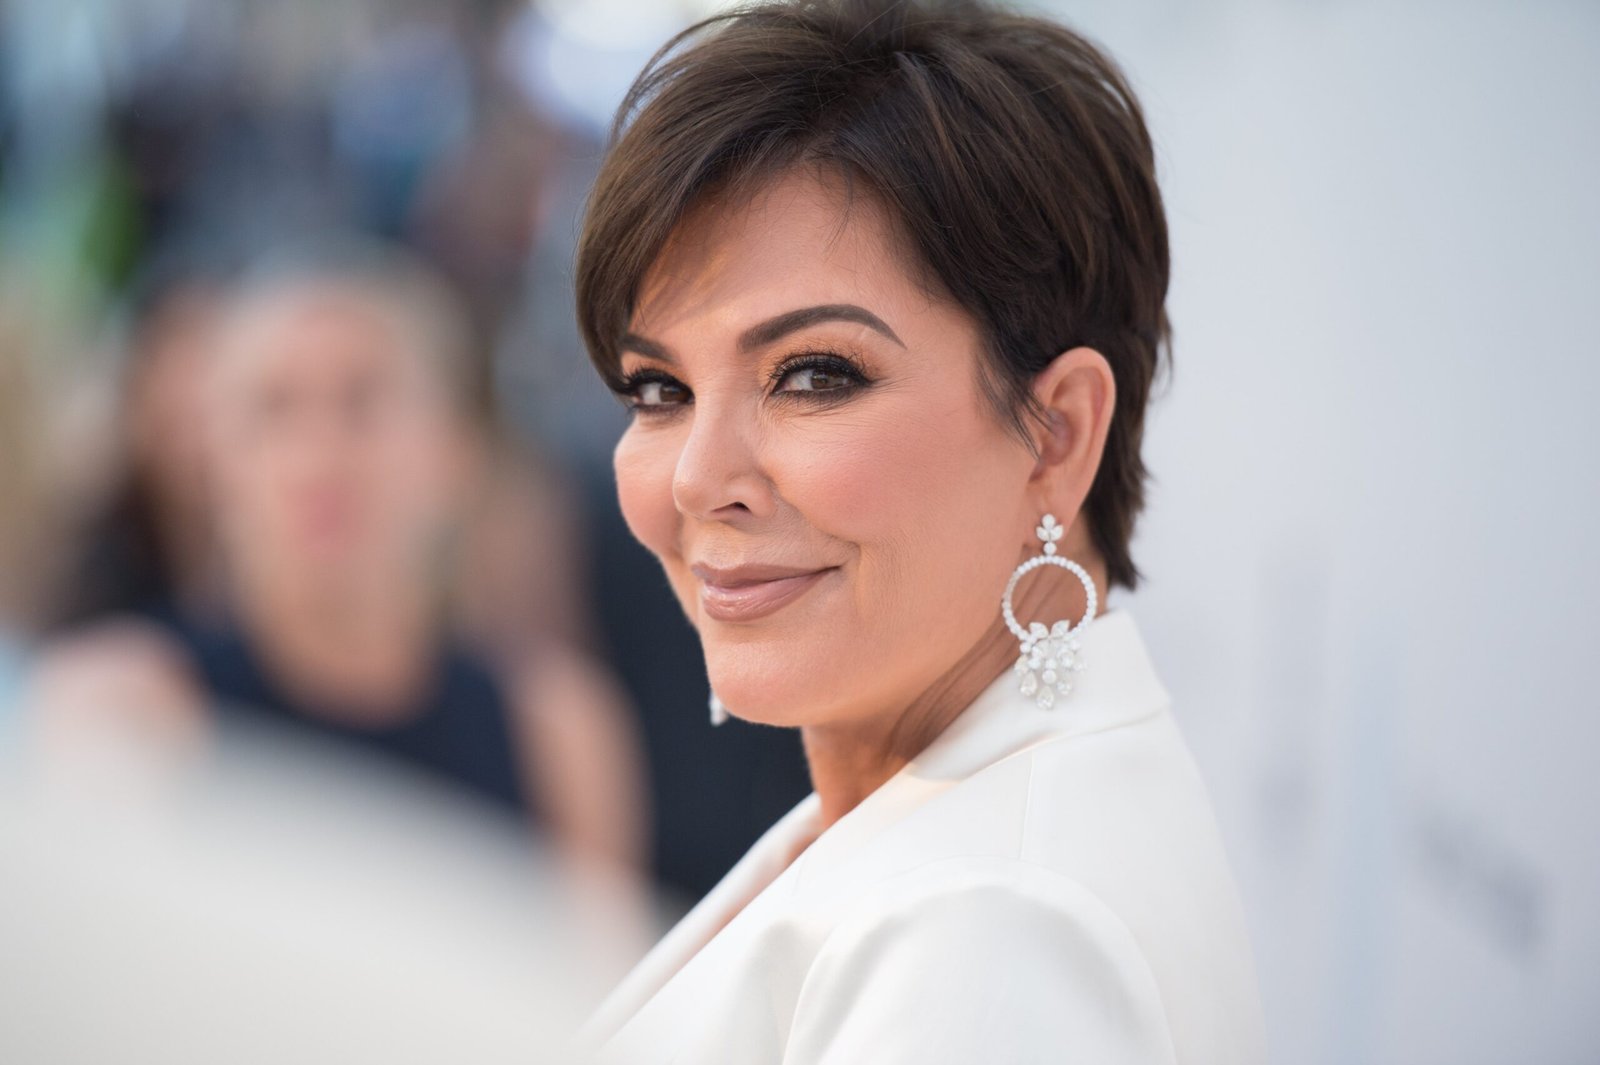 Kris Jenner Is Now a Beauty Influencer